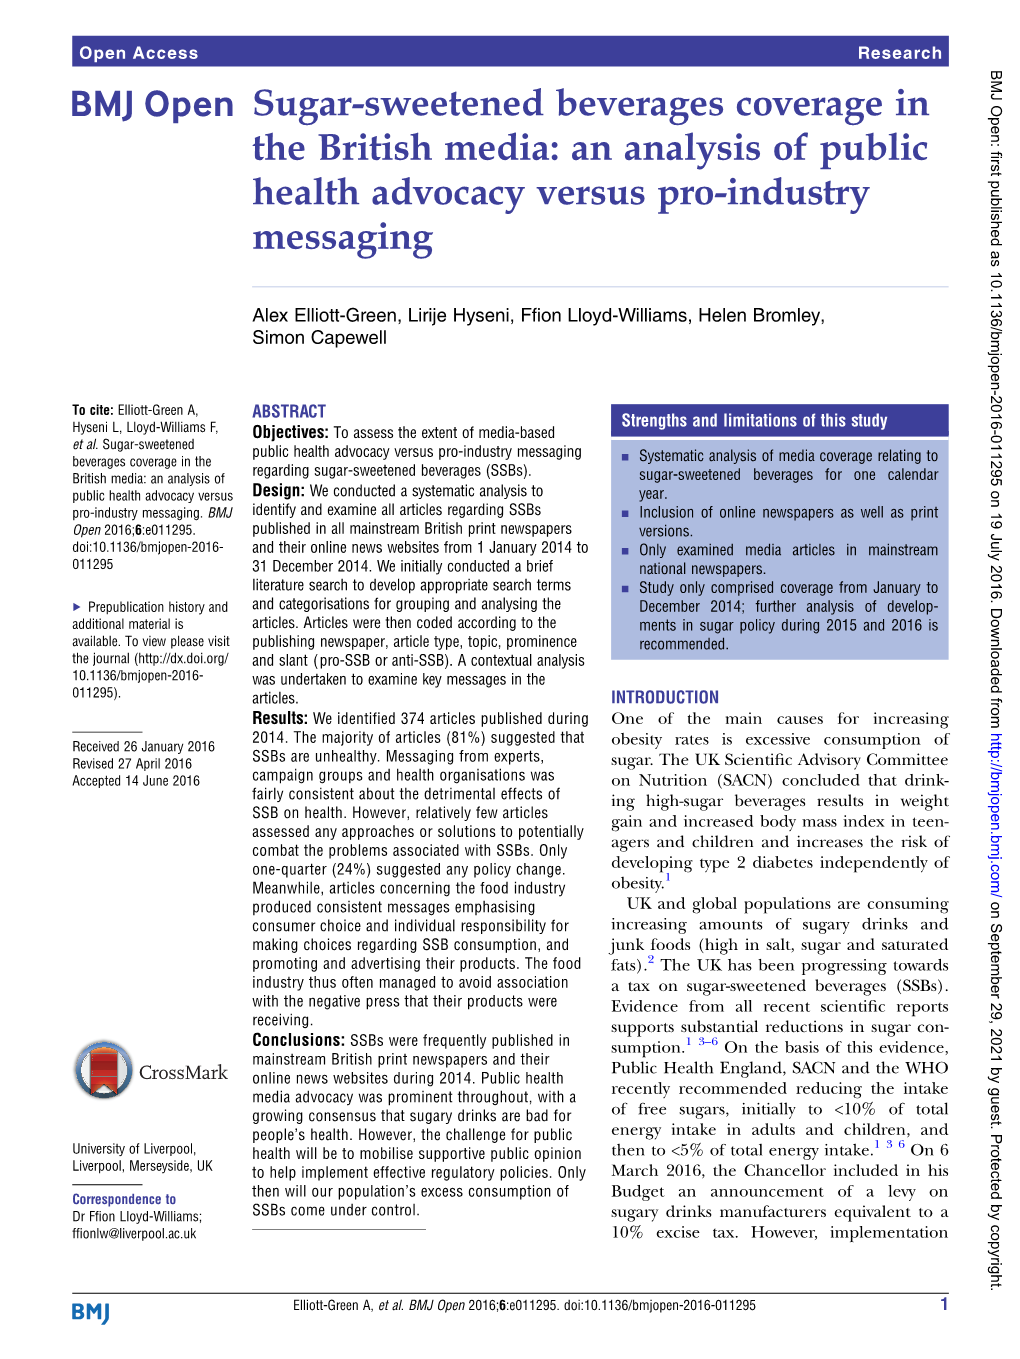 Sugar-Sweetened Beverages Coverage in the British Media: an Analysis of Public Health Advocacy Versus Pro-Industry Messaging